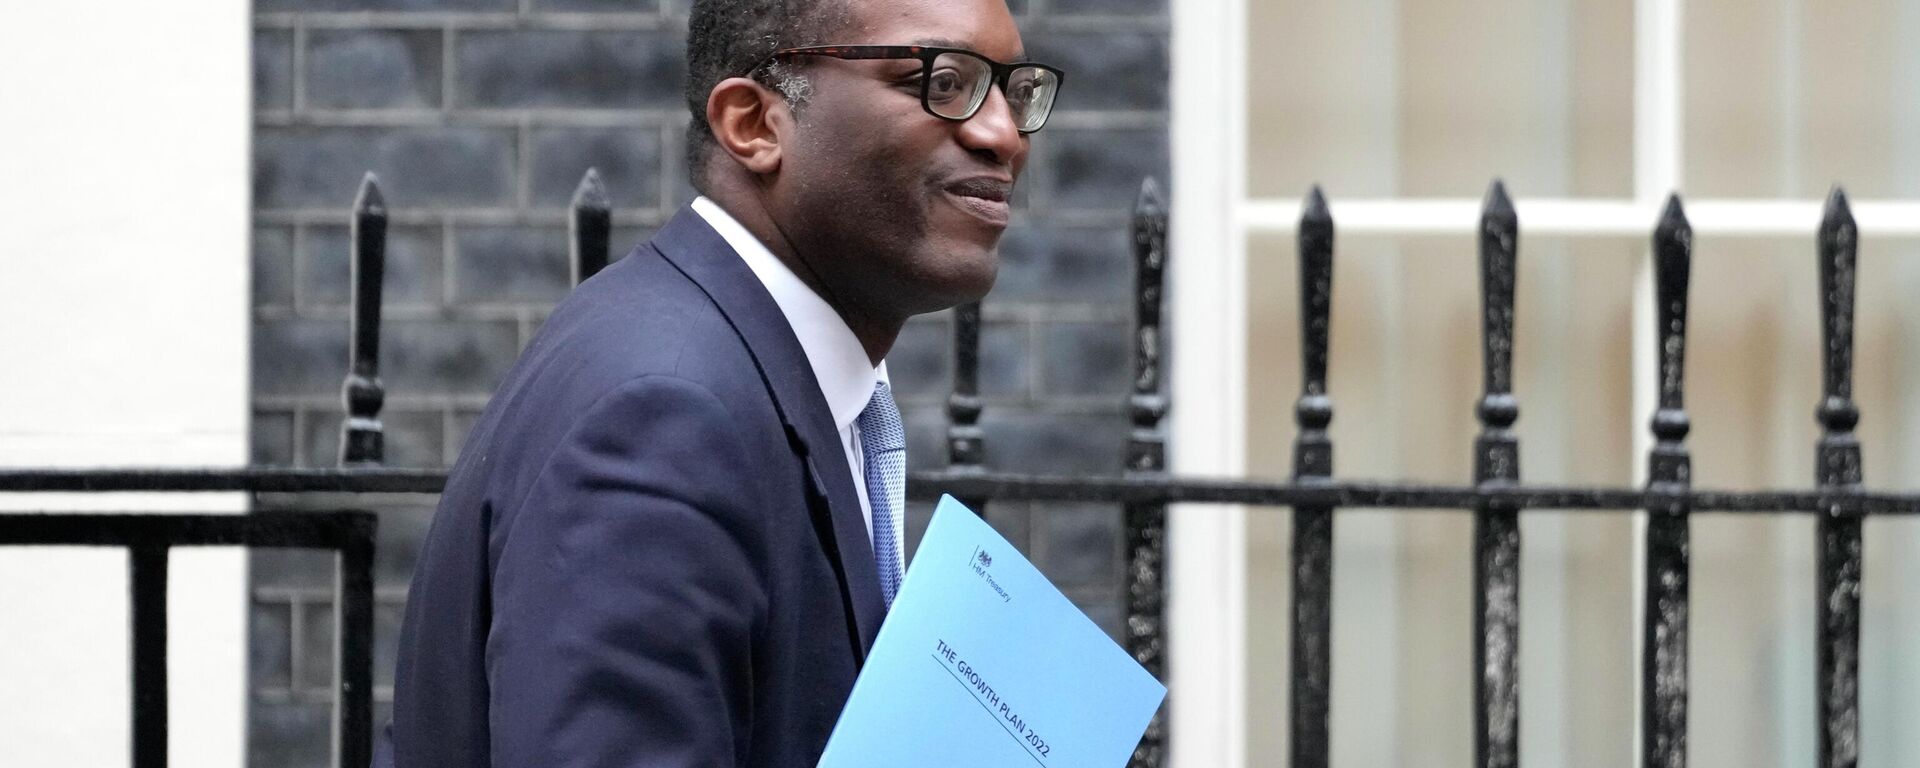 Britain's Chancellor Kwasi Kwarteng leaves 11 Downing Street in London, Friday, Sept. 23, 2022. The Chancellor will deliver a mini budget in parliament. - Sputnik International, 1920, 11.10.2022